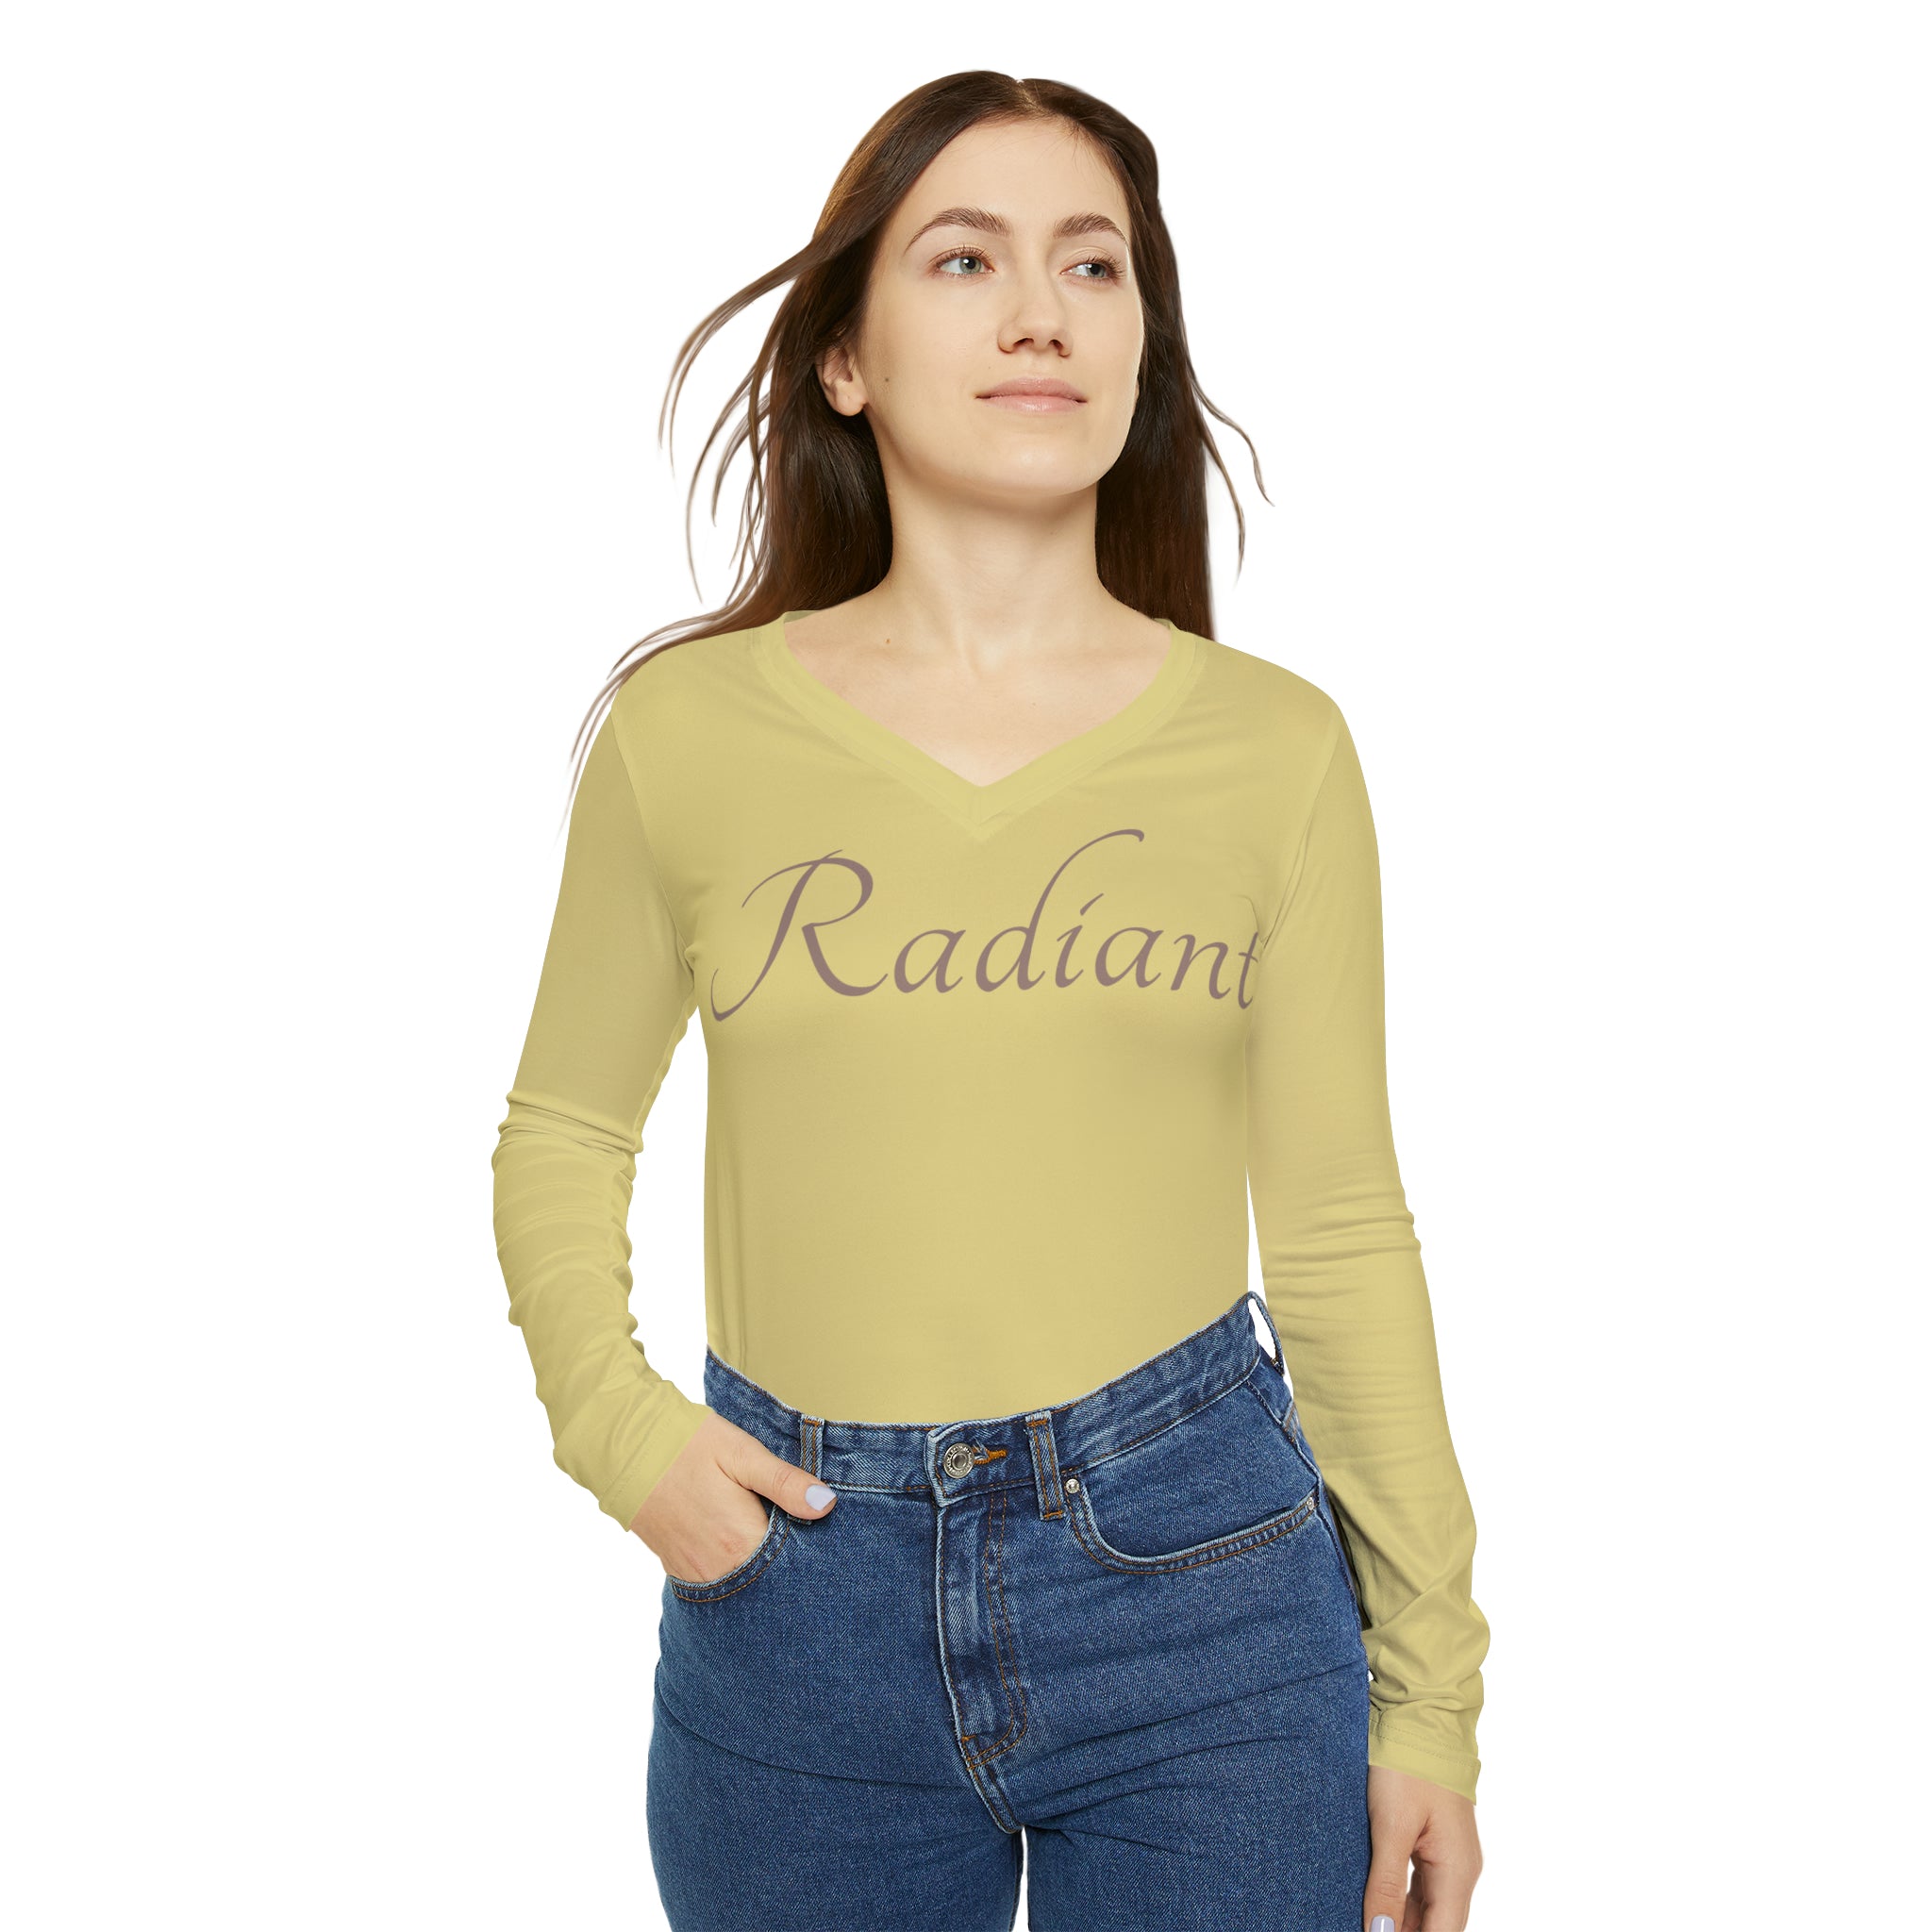 Radiant - Long Sleeve V-neck Shirt Casual Shirt Double Needle Stitching Everyday Wear Mental Health Donation Polyester Spandex Blend Radiant Shirt Statement Shirt All Over Prints 4645535512731081320_2048 Printify